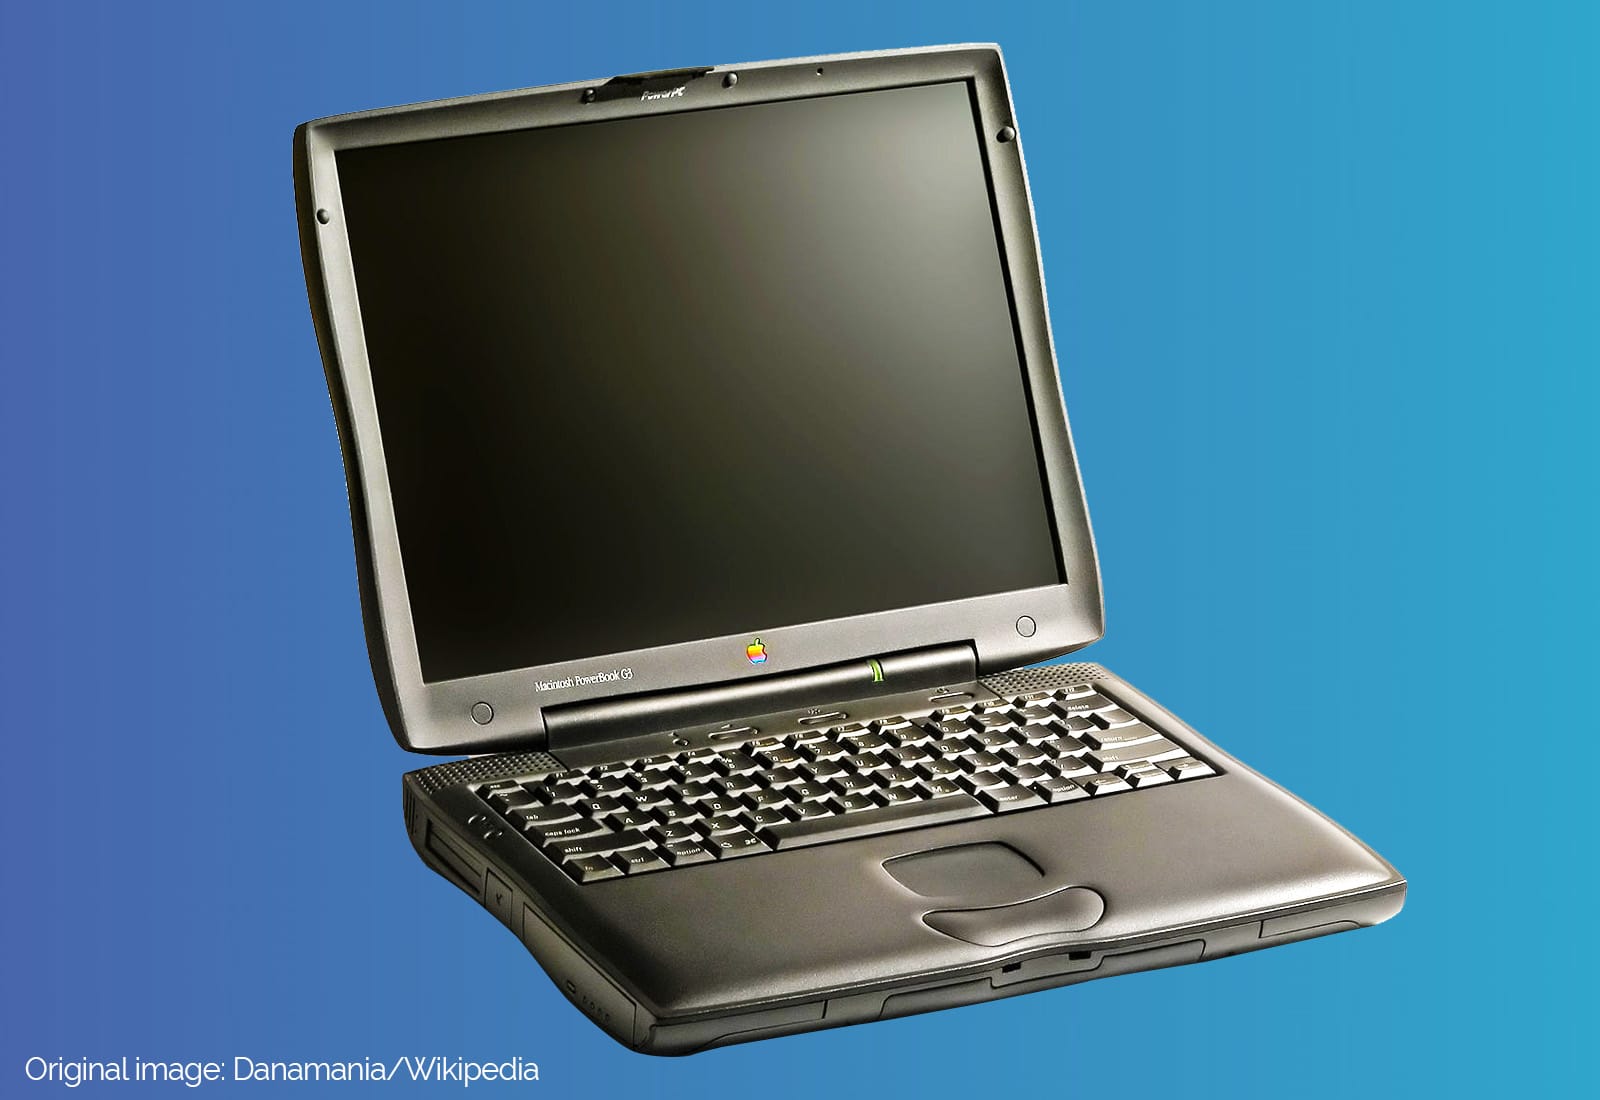 The PowerBook G3 Lombard brought a 